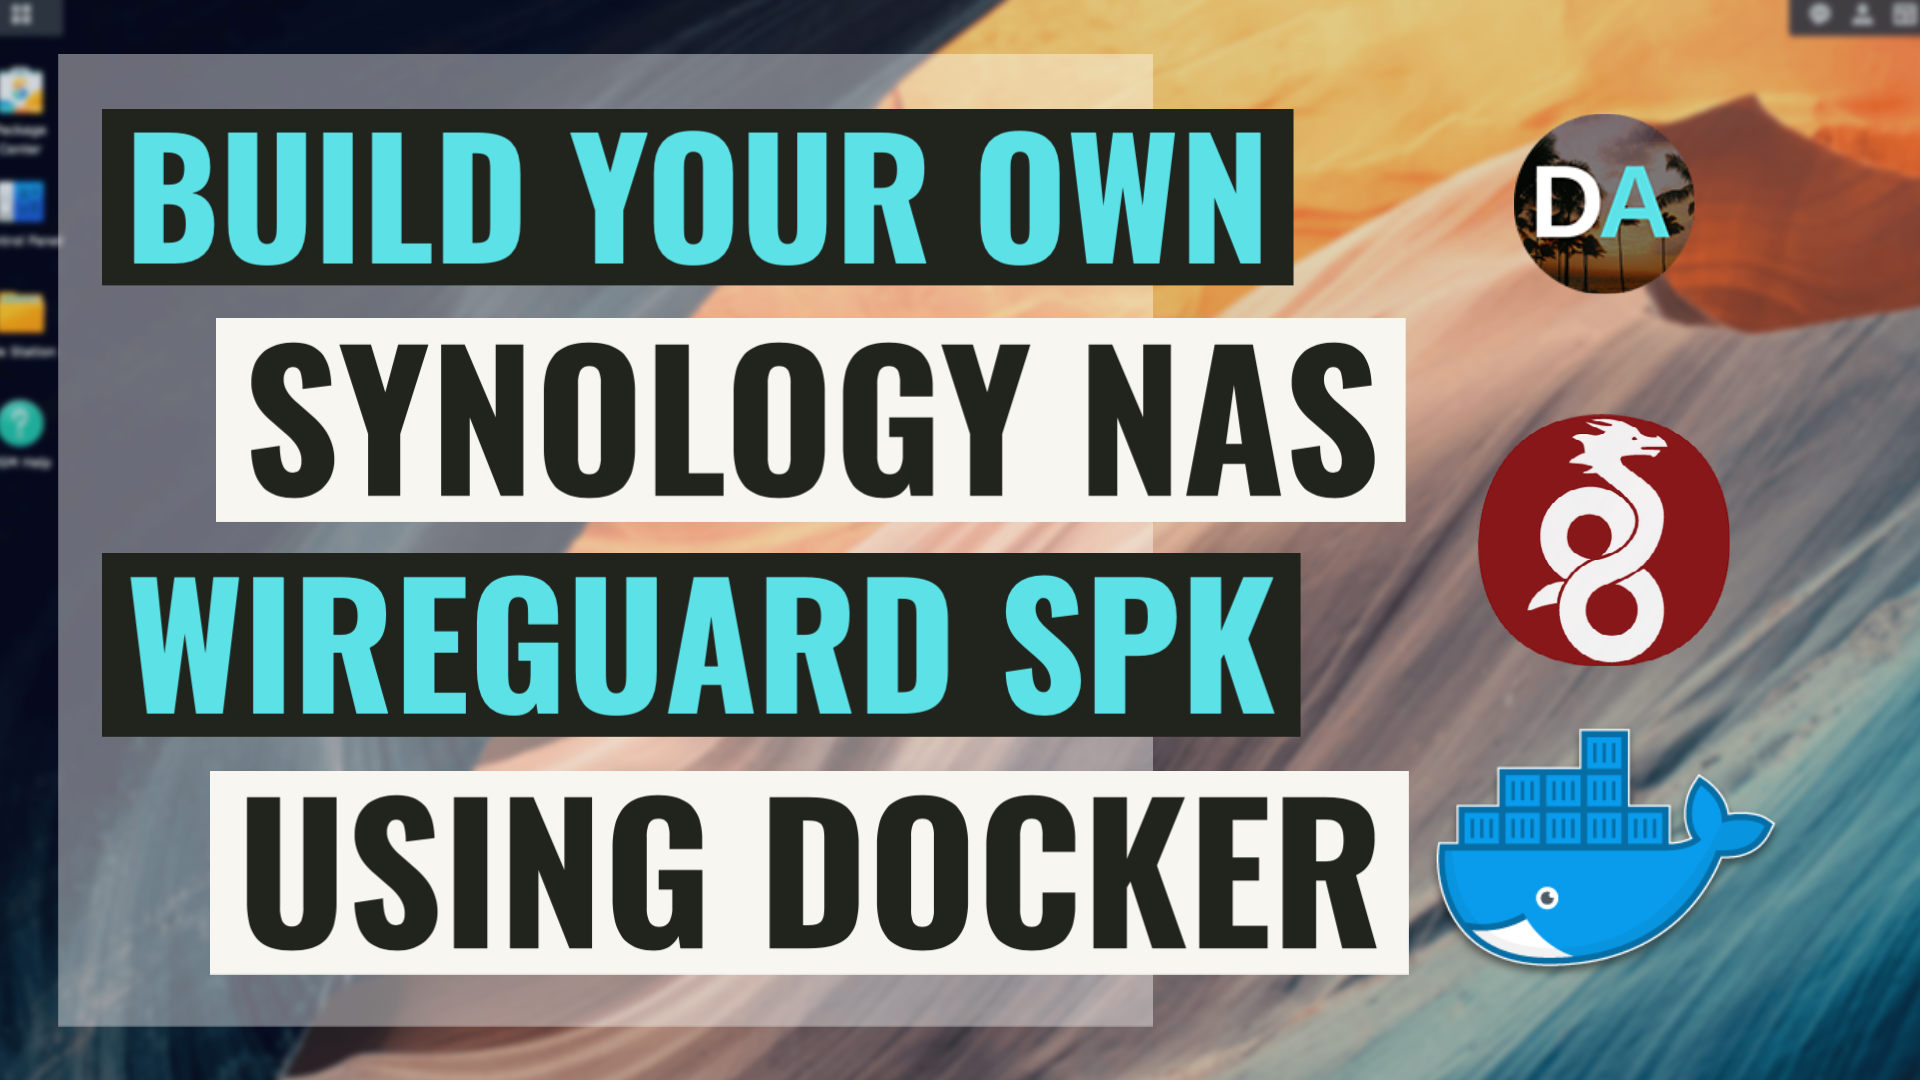 Build Your Own Wireguard SPK File For Your Synology NAS Using Docker